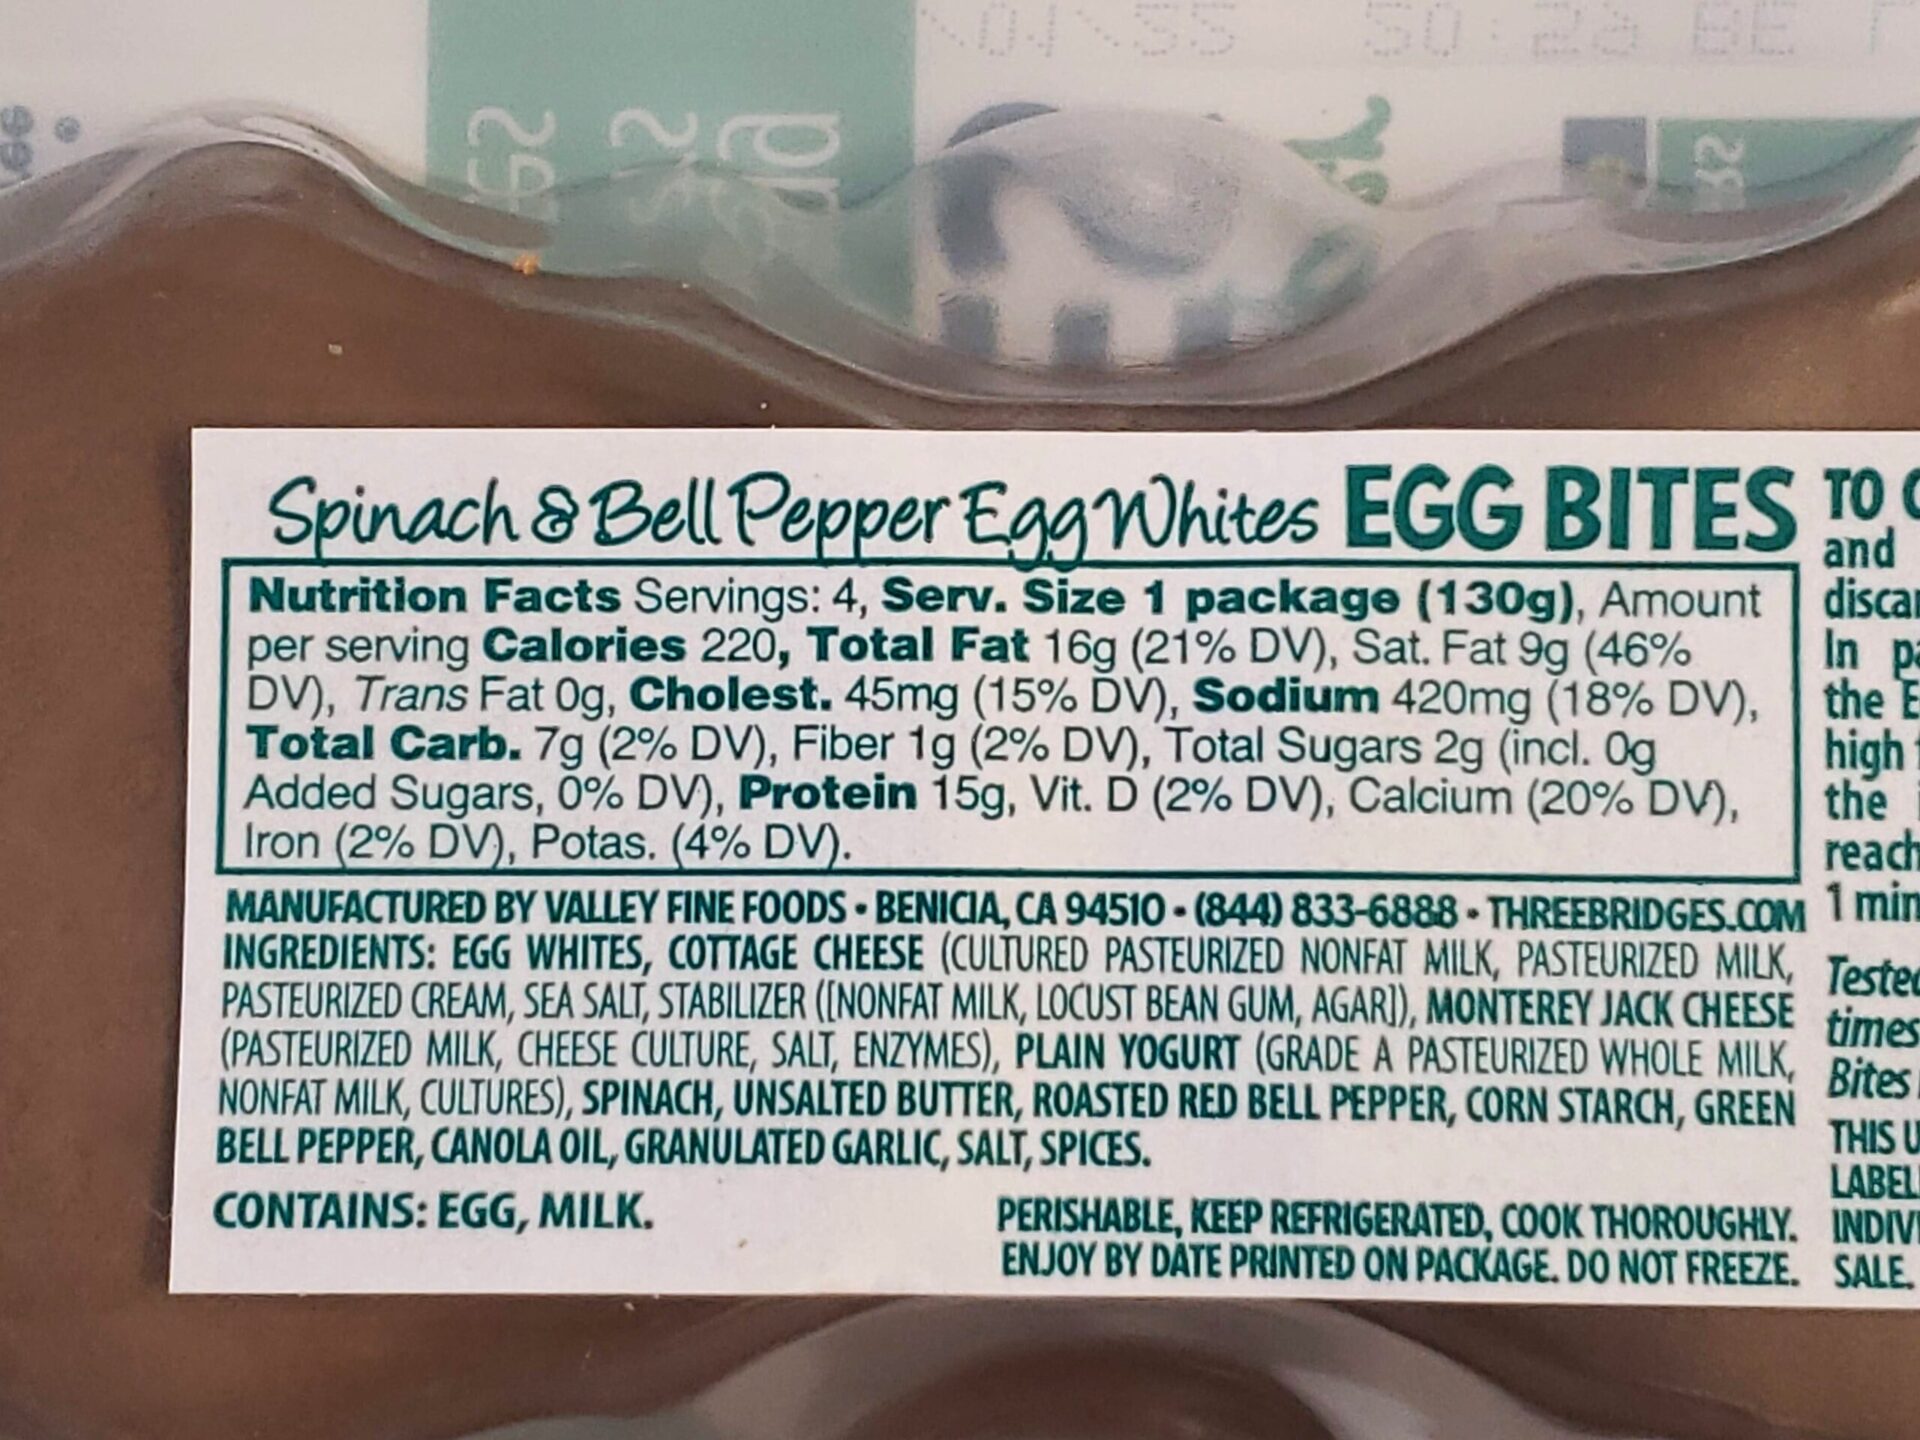 Spinach-and-Bell-Pepper-Egg-Bite-Nutrition